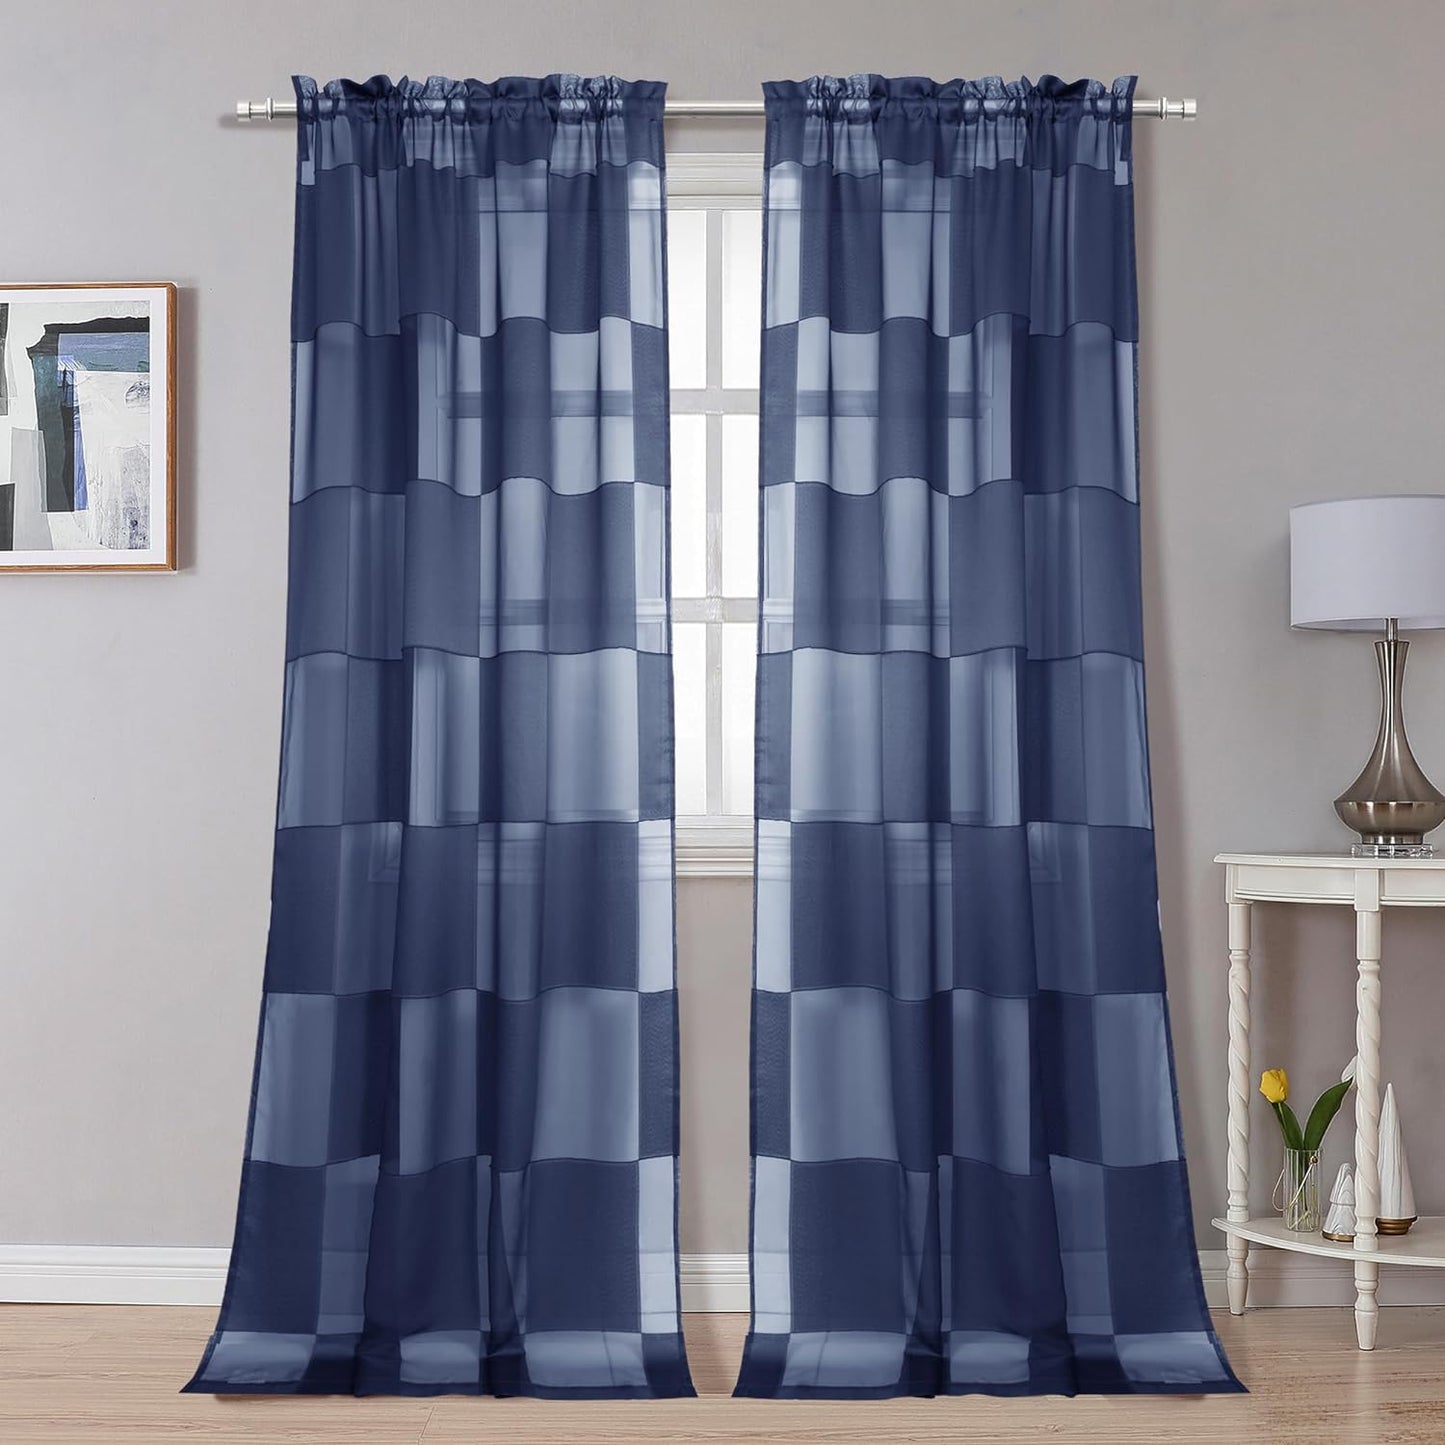 OVZME Sage Green Sheer Bedroom Curtains 84 Inch Length 2 Panels Set, Dual Rod Pocket Clip Checkered Window Curtains for Living Room, Light Filtering & Privacy Sheer Green Drapes, Each 42W X 84L  OVZME Navy Blue 42W X 108L 